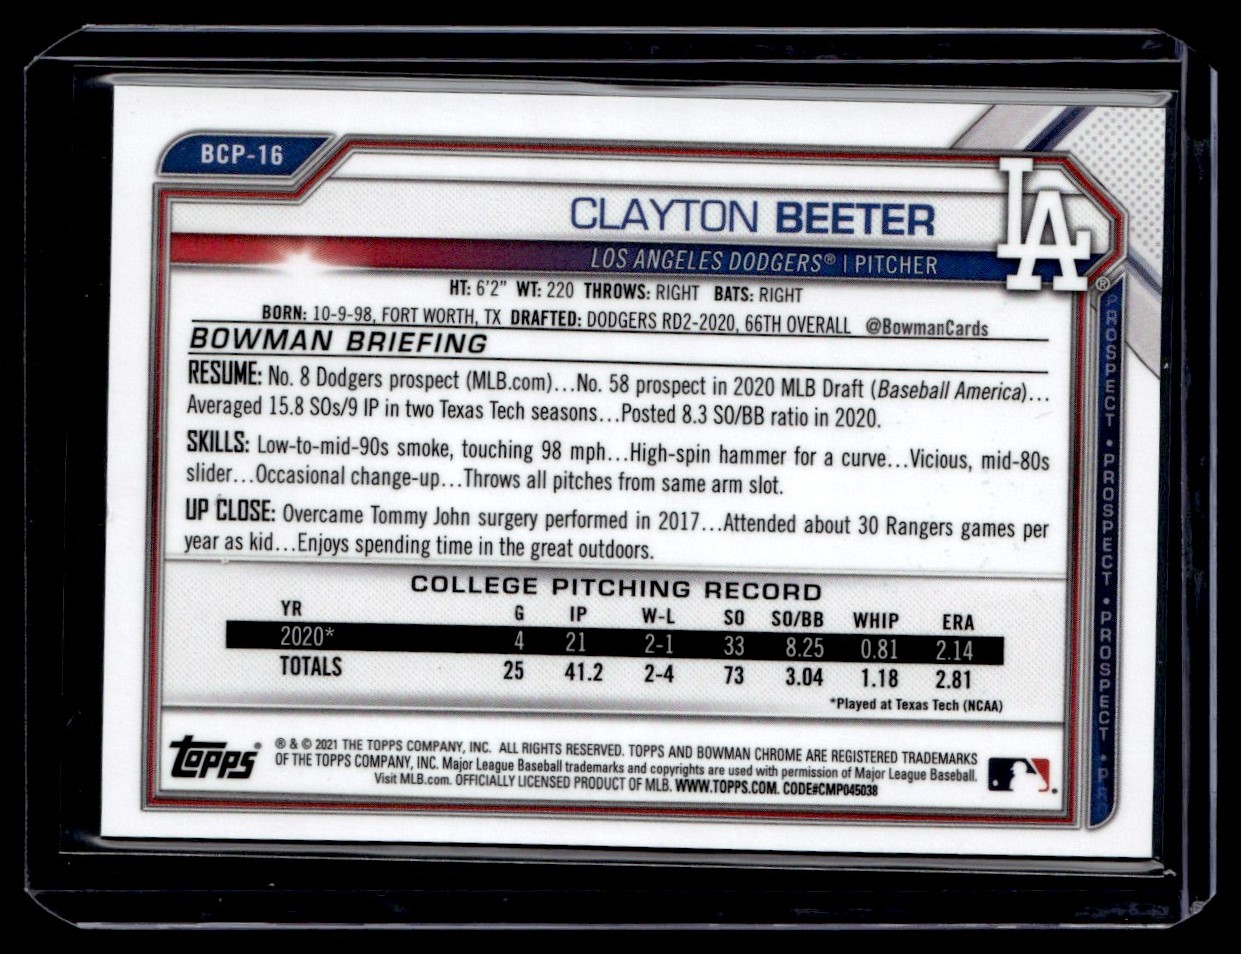 2021 Bowman Sapphire Edition Red Refractor Clayton Beeter #BCP-16 card back image